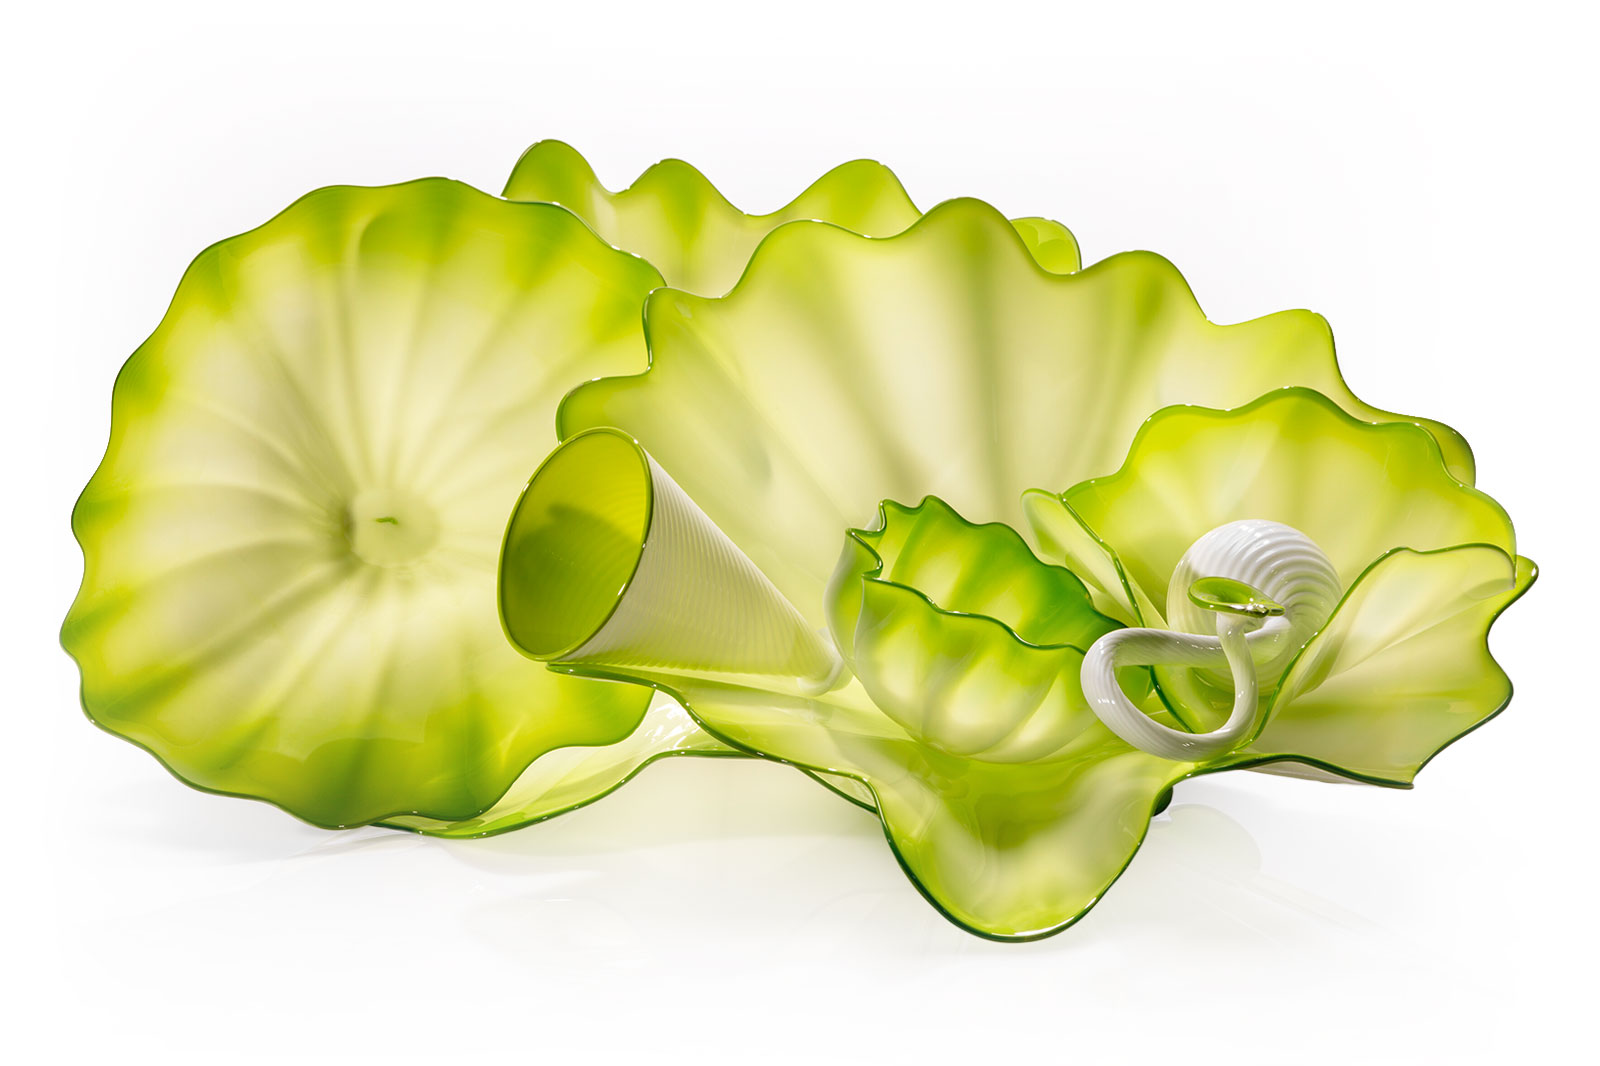 White and Neon Green Persian Set, 2014 by Dale Chihuly